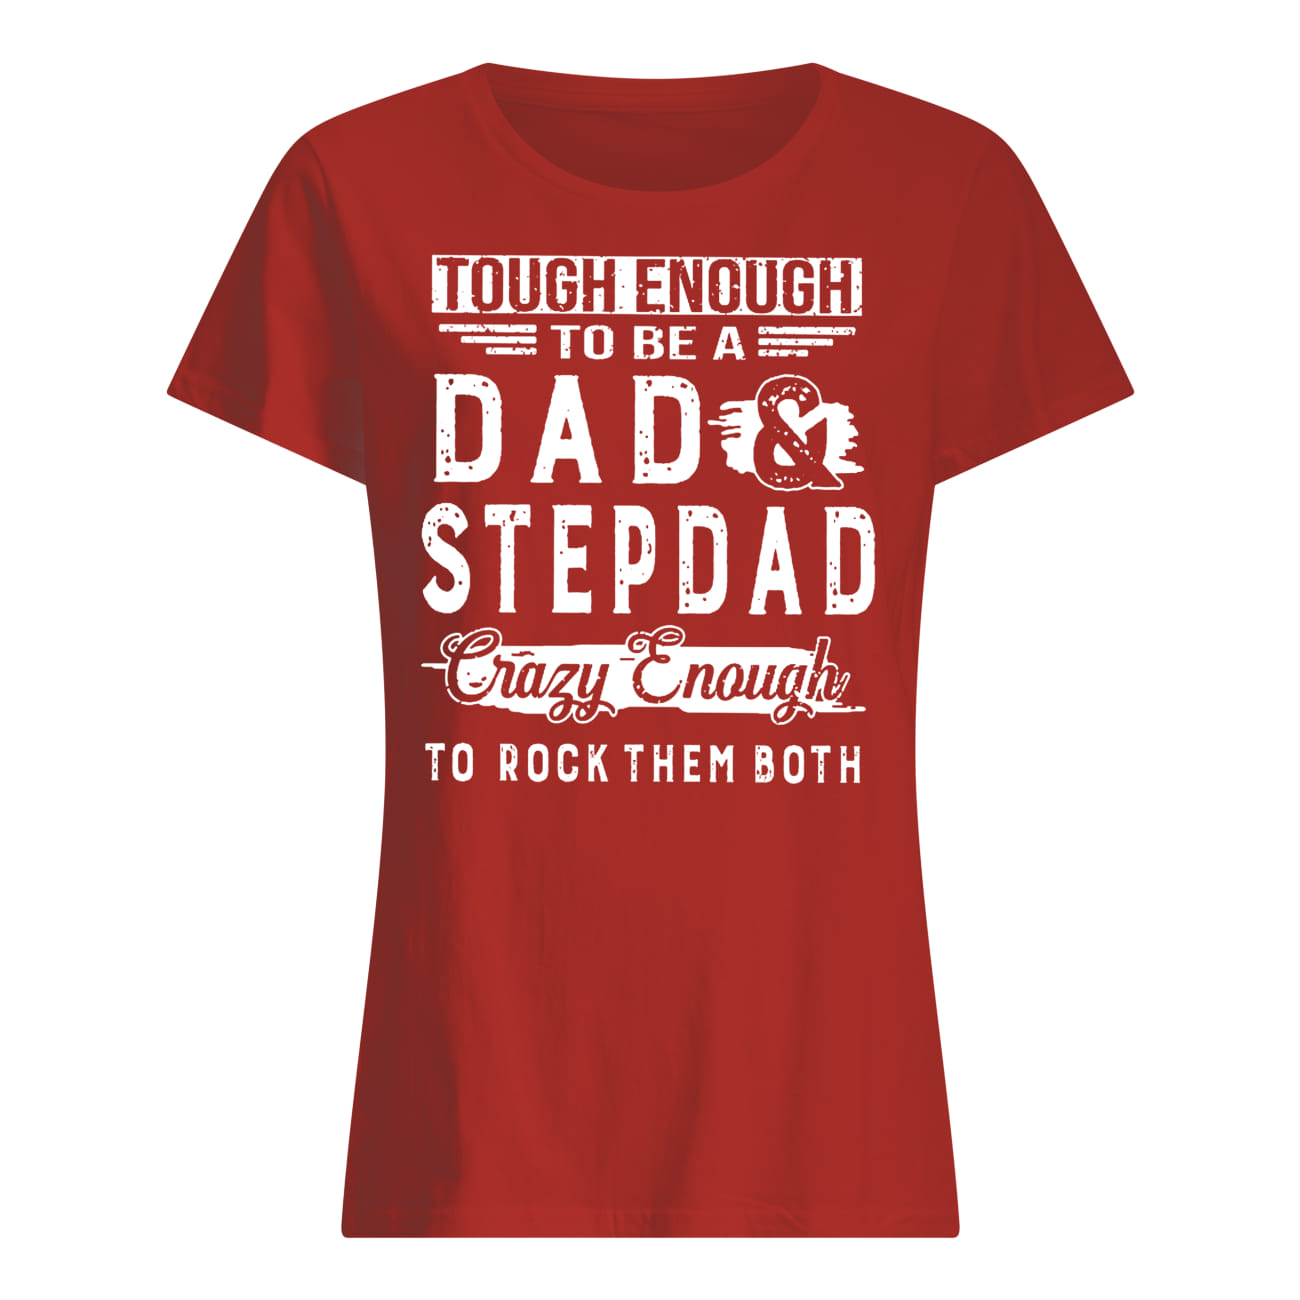 Tough enough to be a dad and stepdad crazy enough to rock them both lady shirt